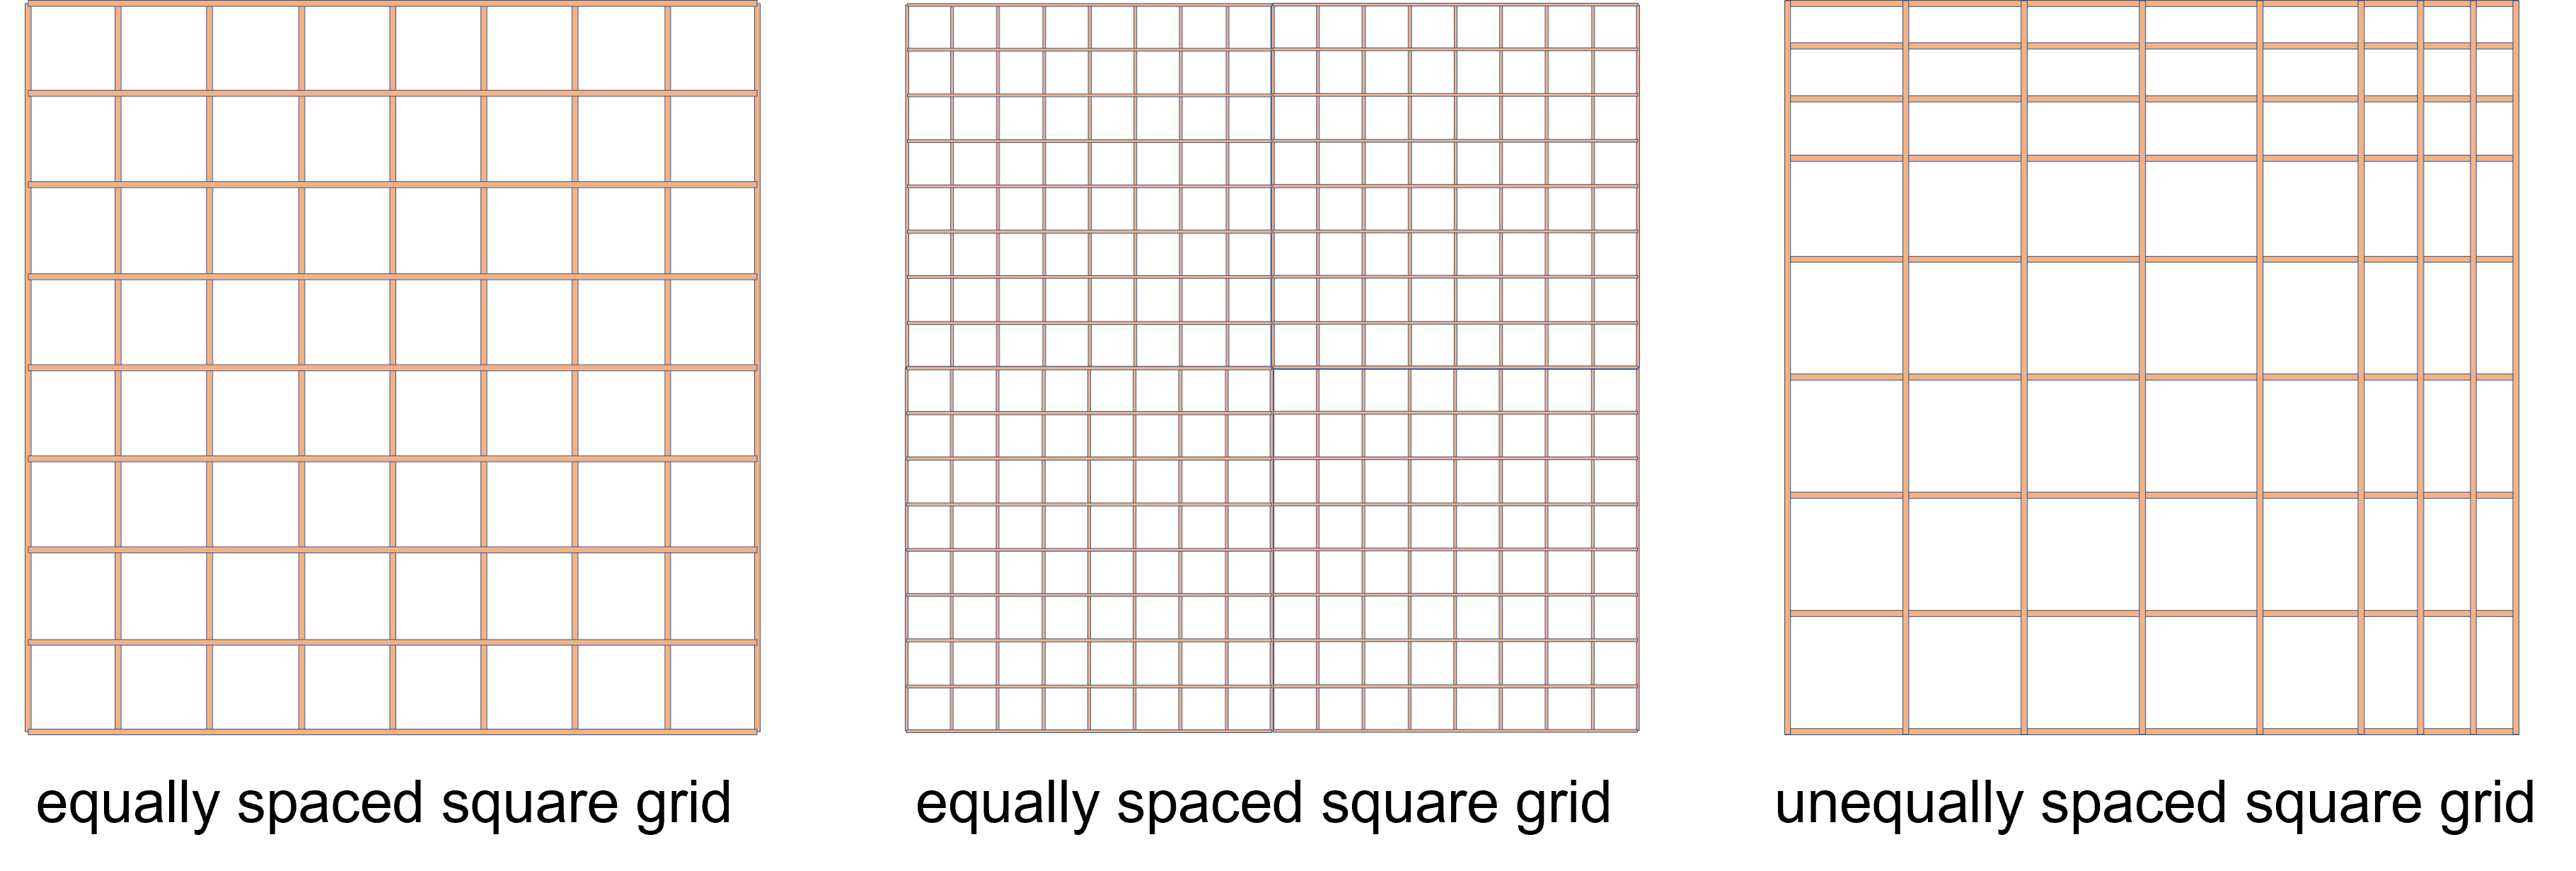 Typical Equally Spaced Square Earthing Grid Without Rods